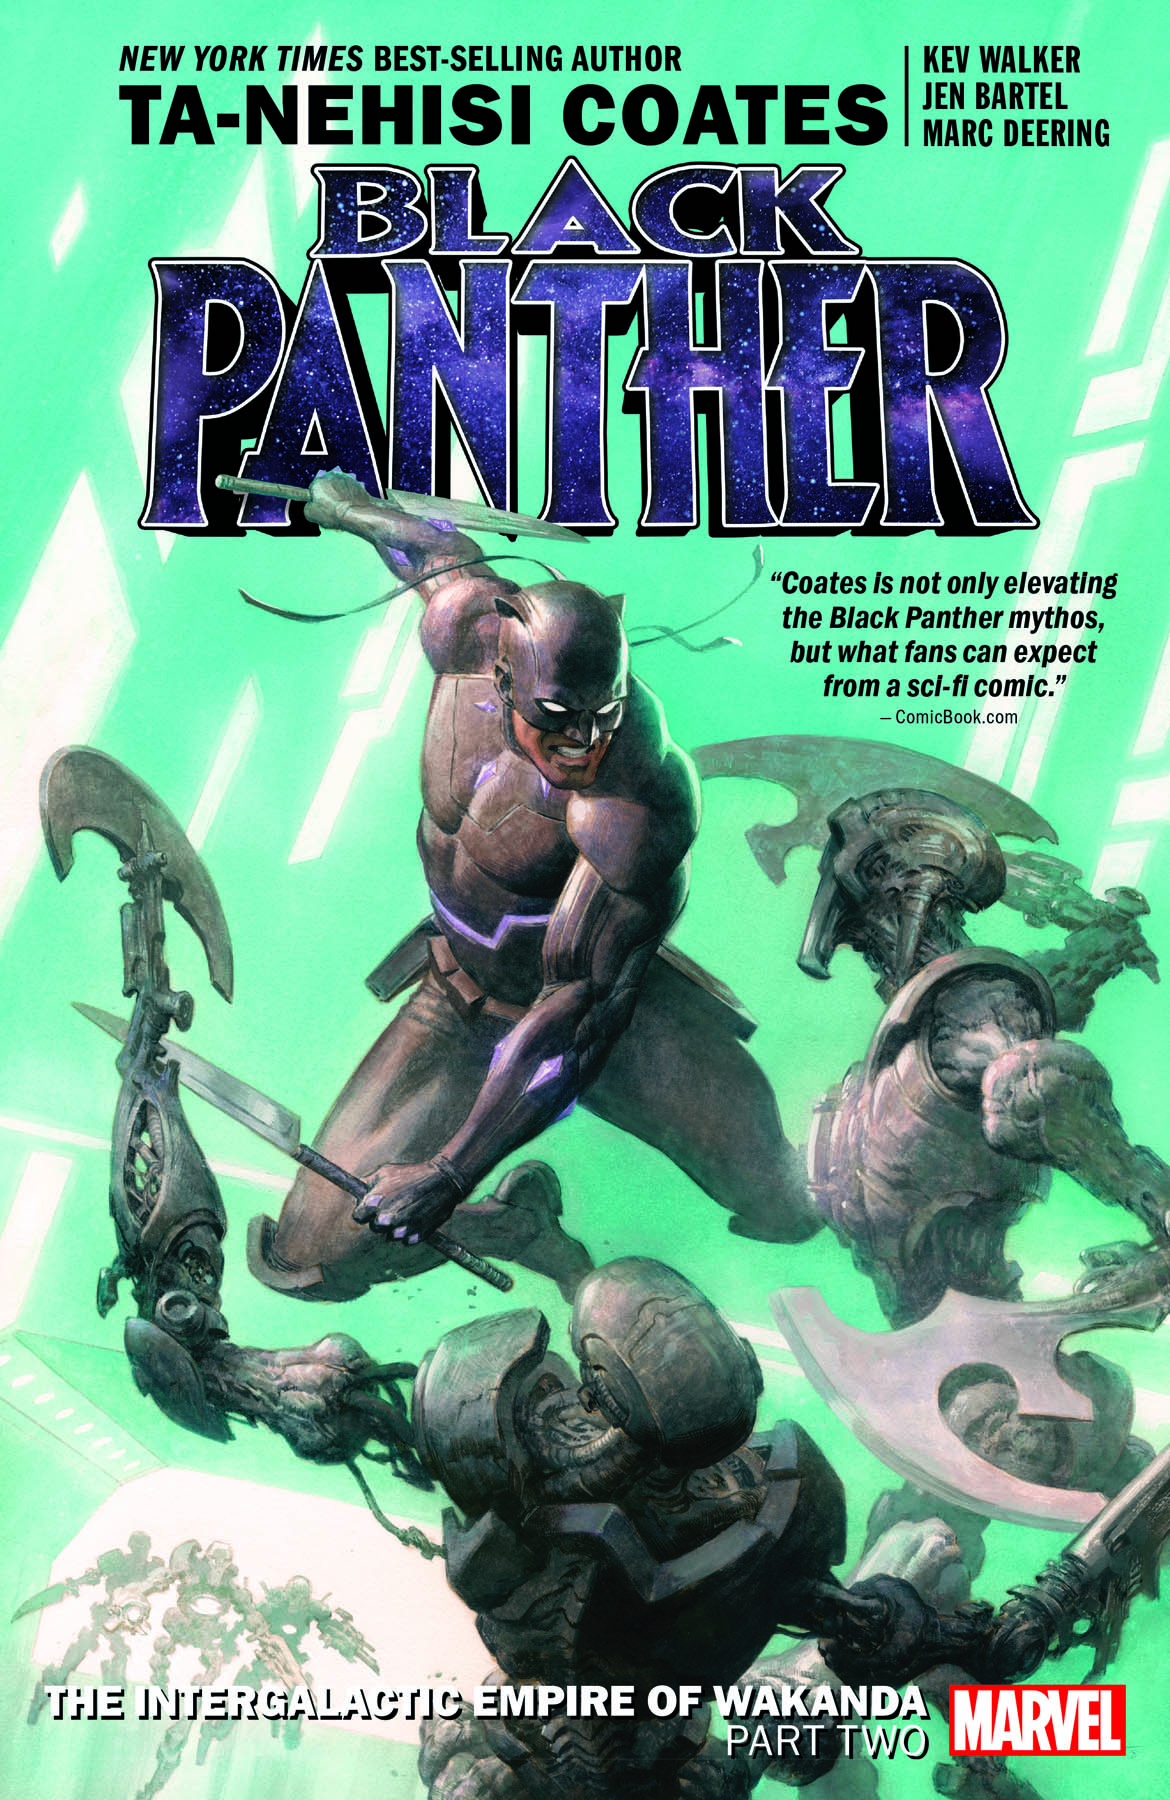 Black Panther Book 7: The Intergalactic Empire Of Wakanda Part Two (Trade Paperback)